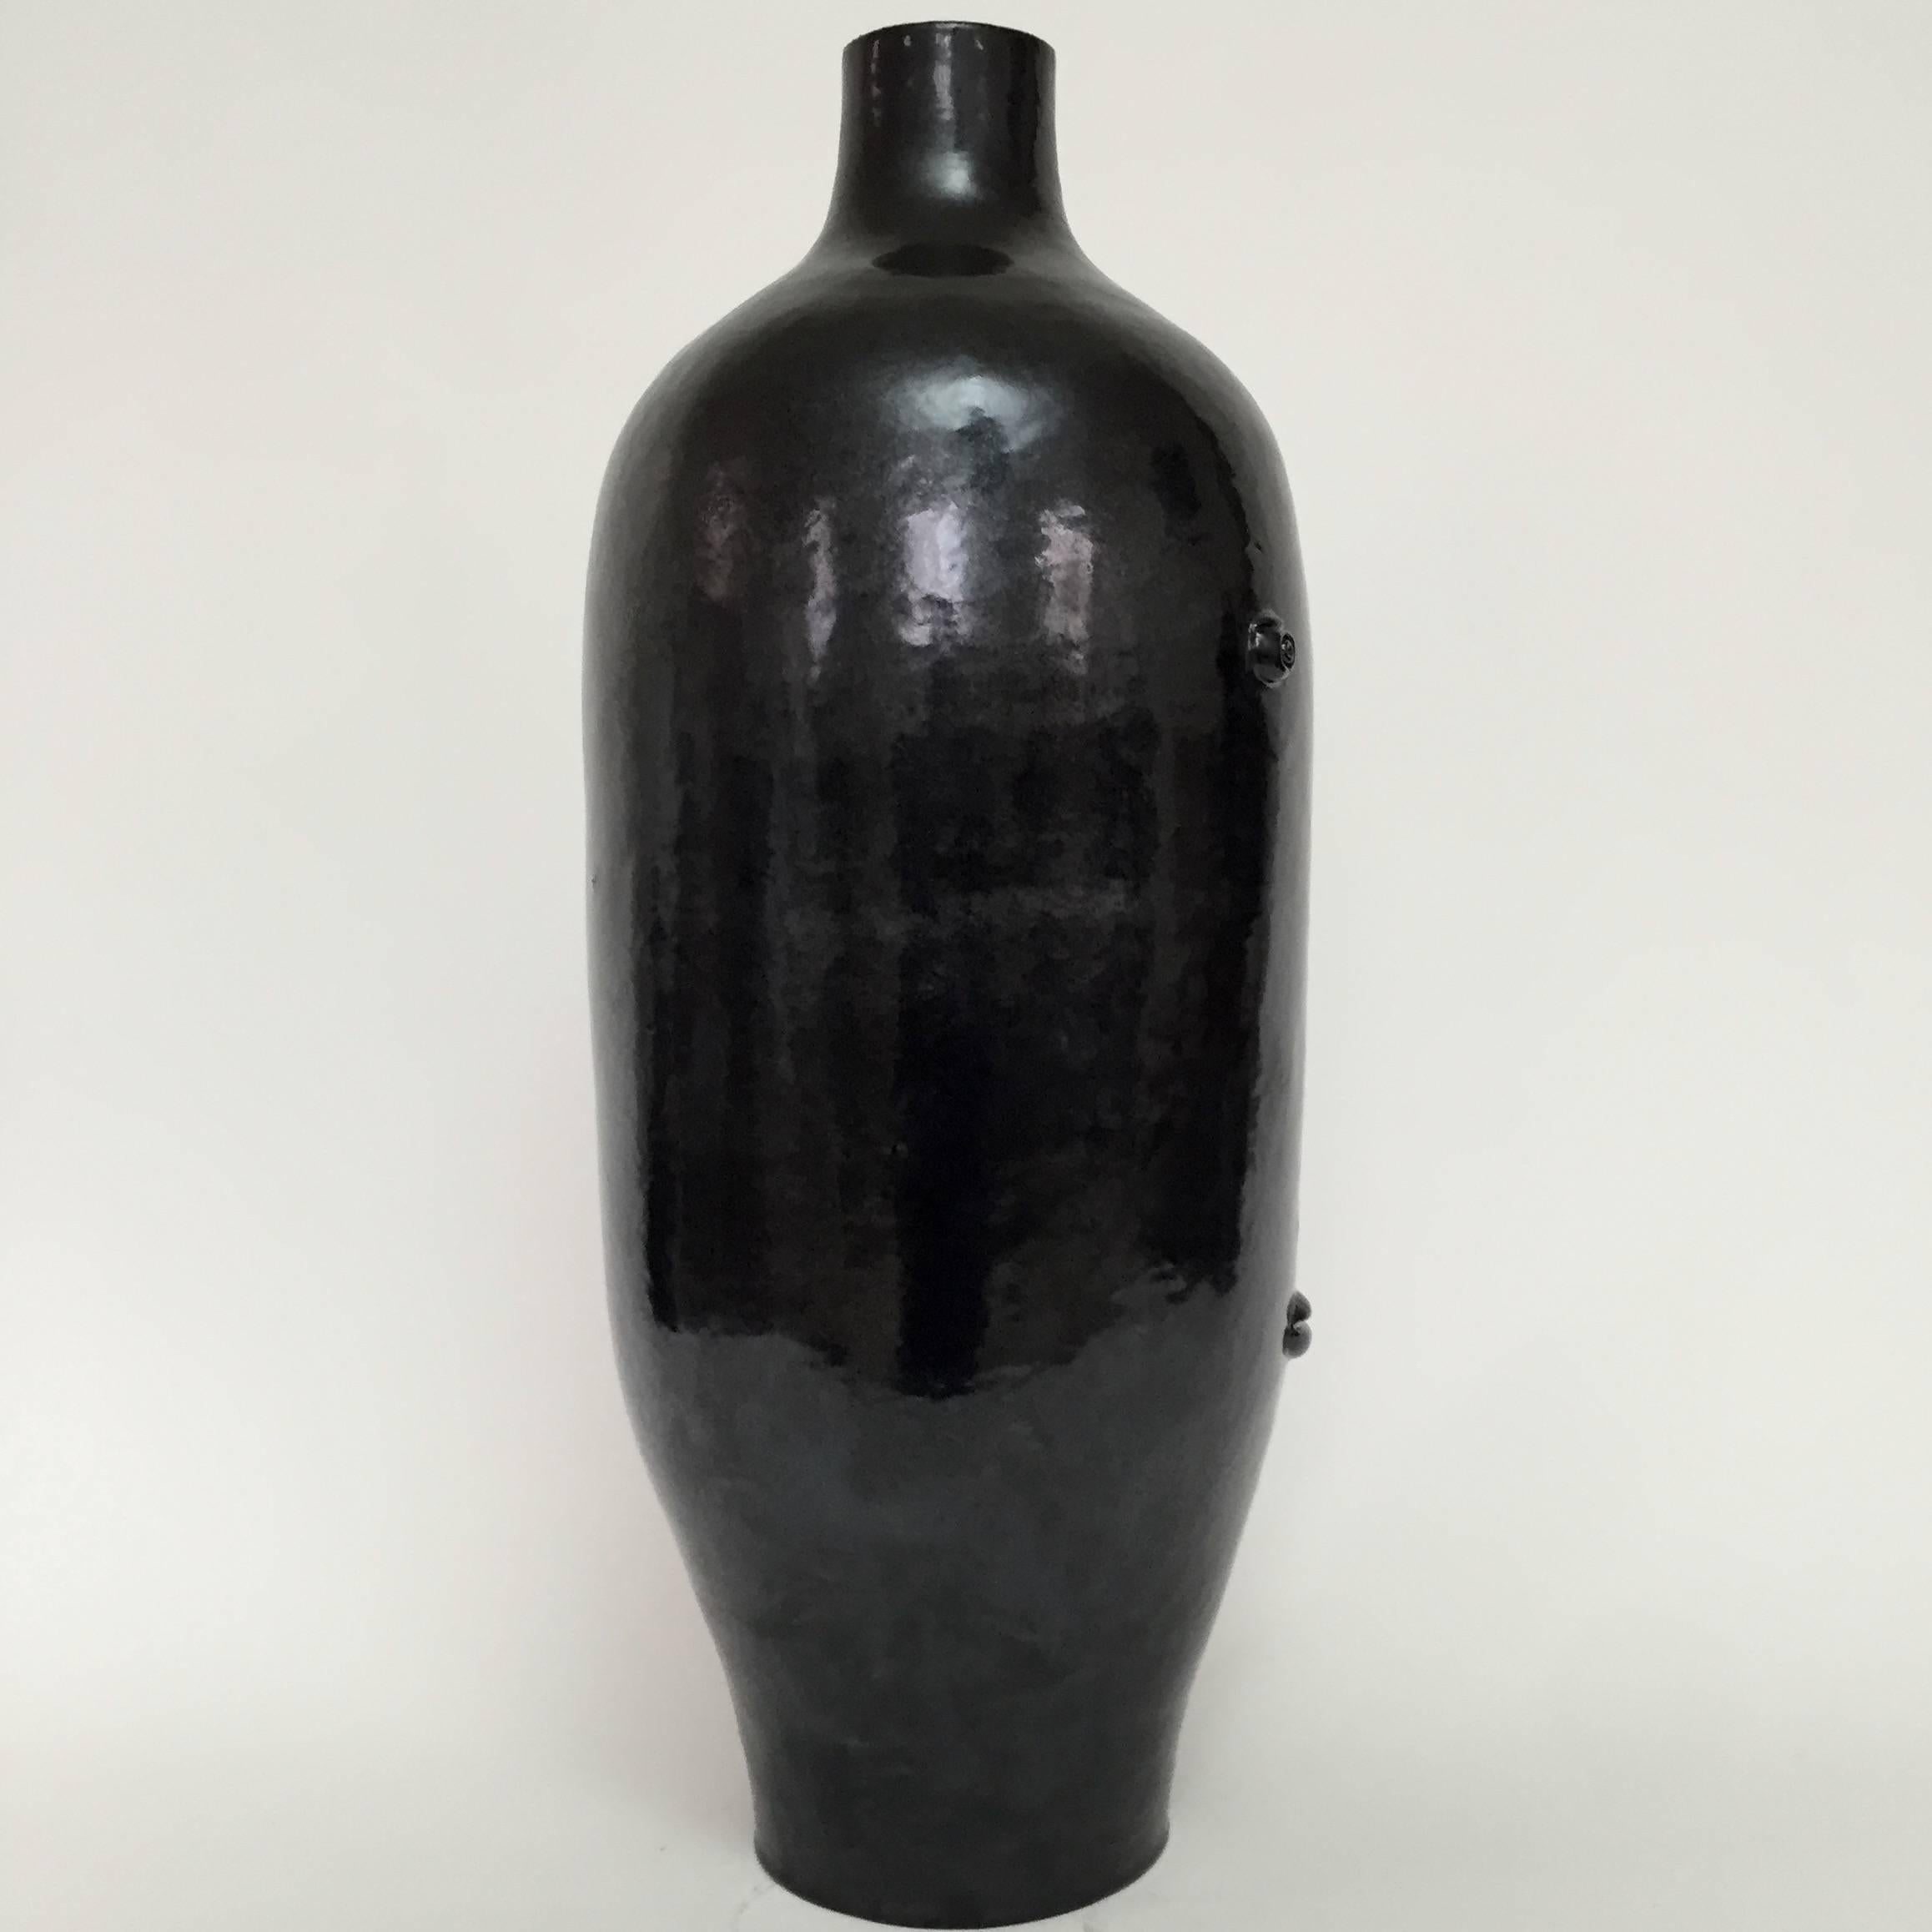 Important hand-made sculpture forming biomorphic lamp-base.
Stoneware glazed in glossy black, decorated with stylized visage sculpted and incised in front.
One of a kind ceramic piece designed and signed by the French ceramicists, Dalo. 

The